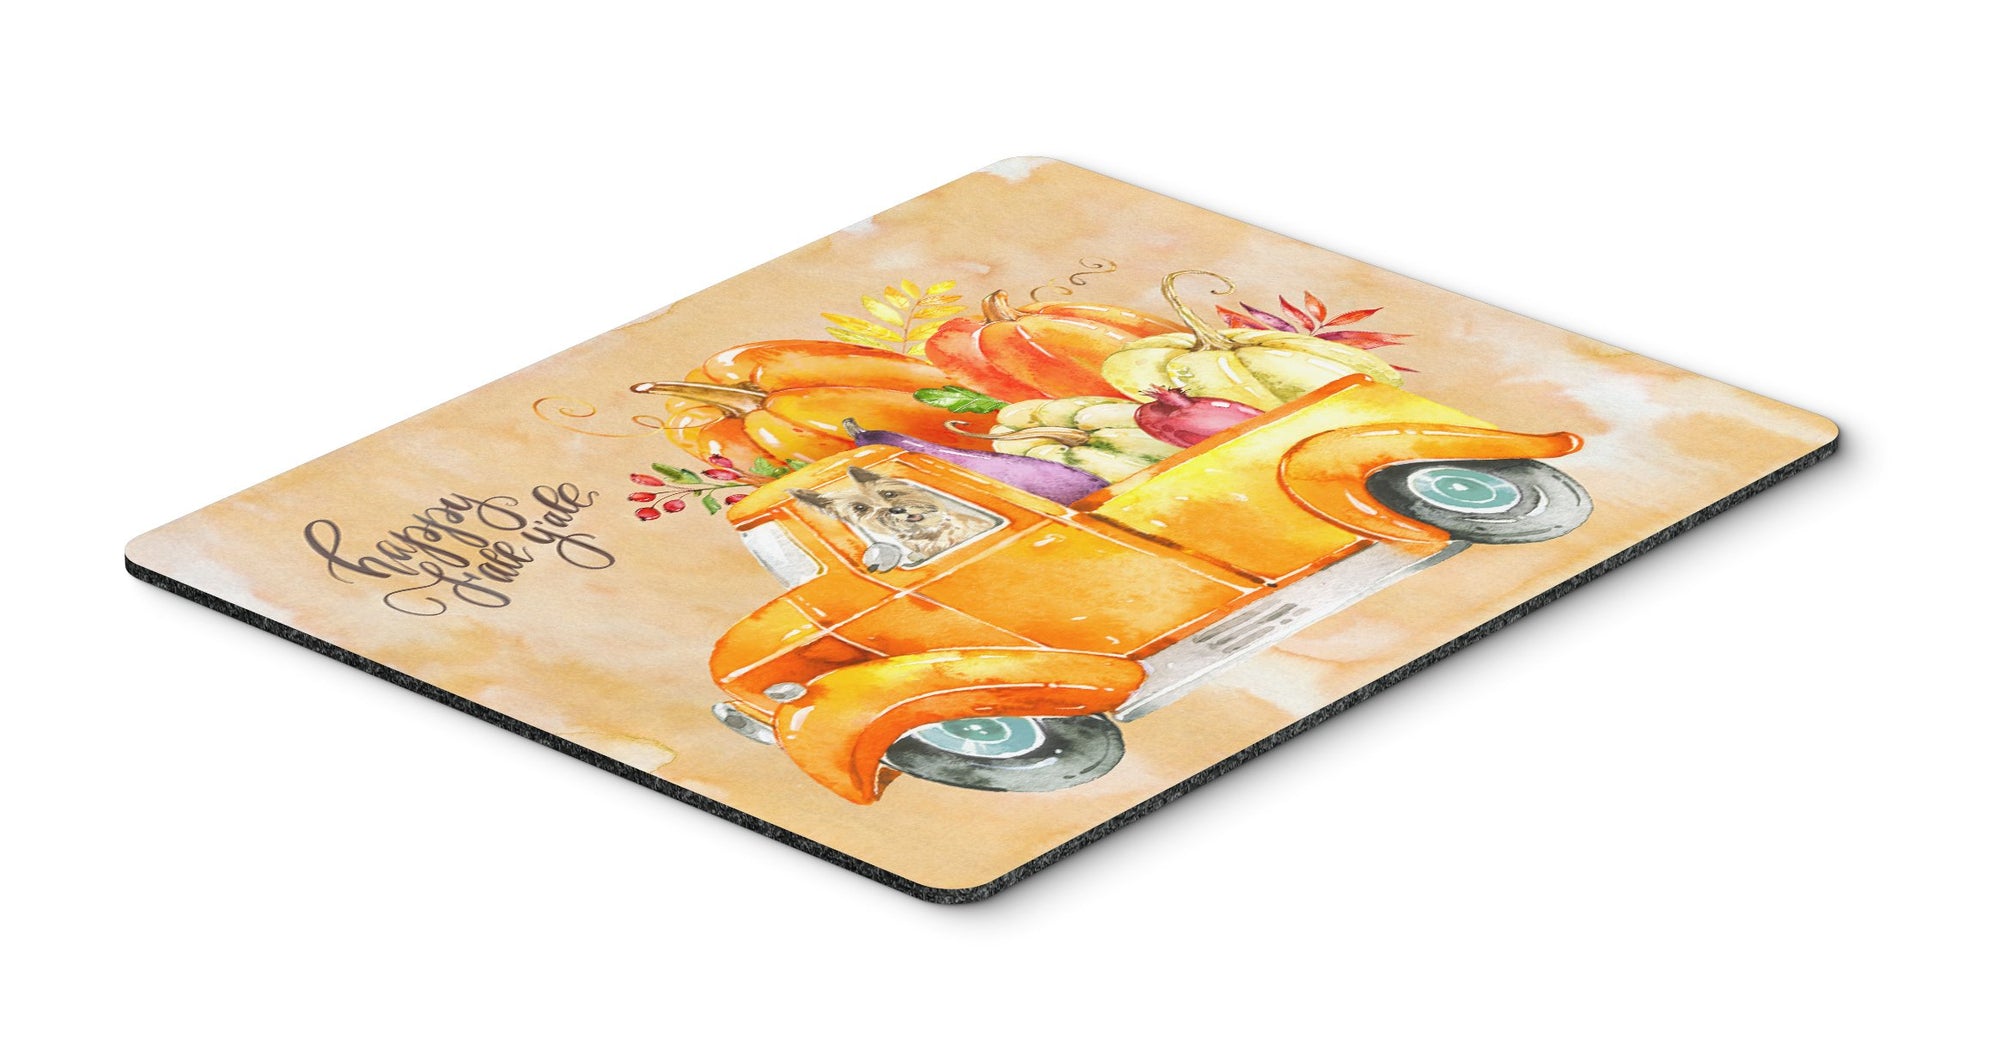 Fall Harvest Cairn Terrier Mouse Pad, Hot Pad or Trivet CK2613MP by Caroline's Treasures